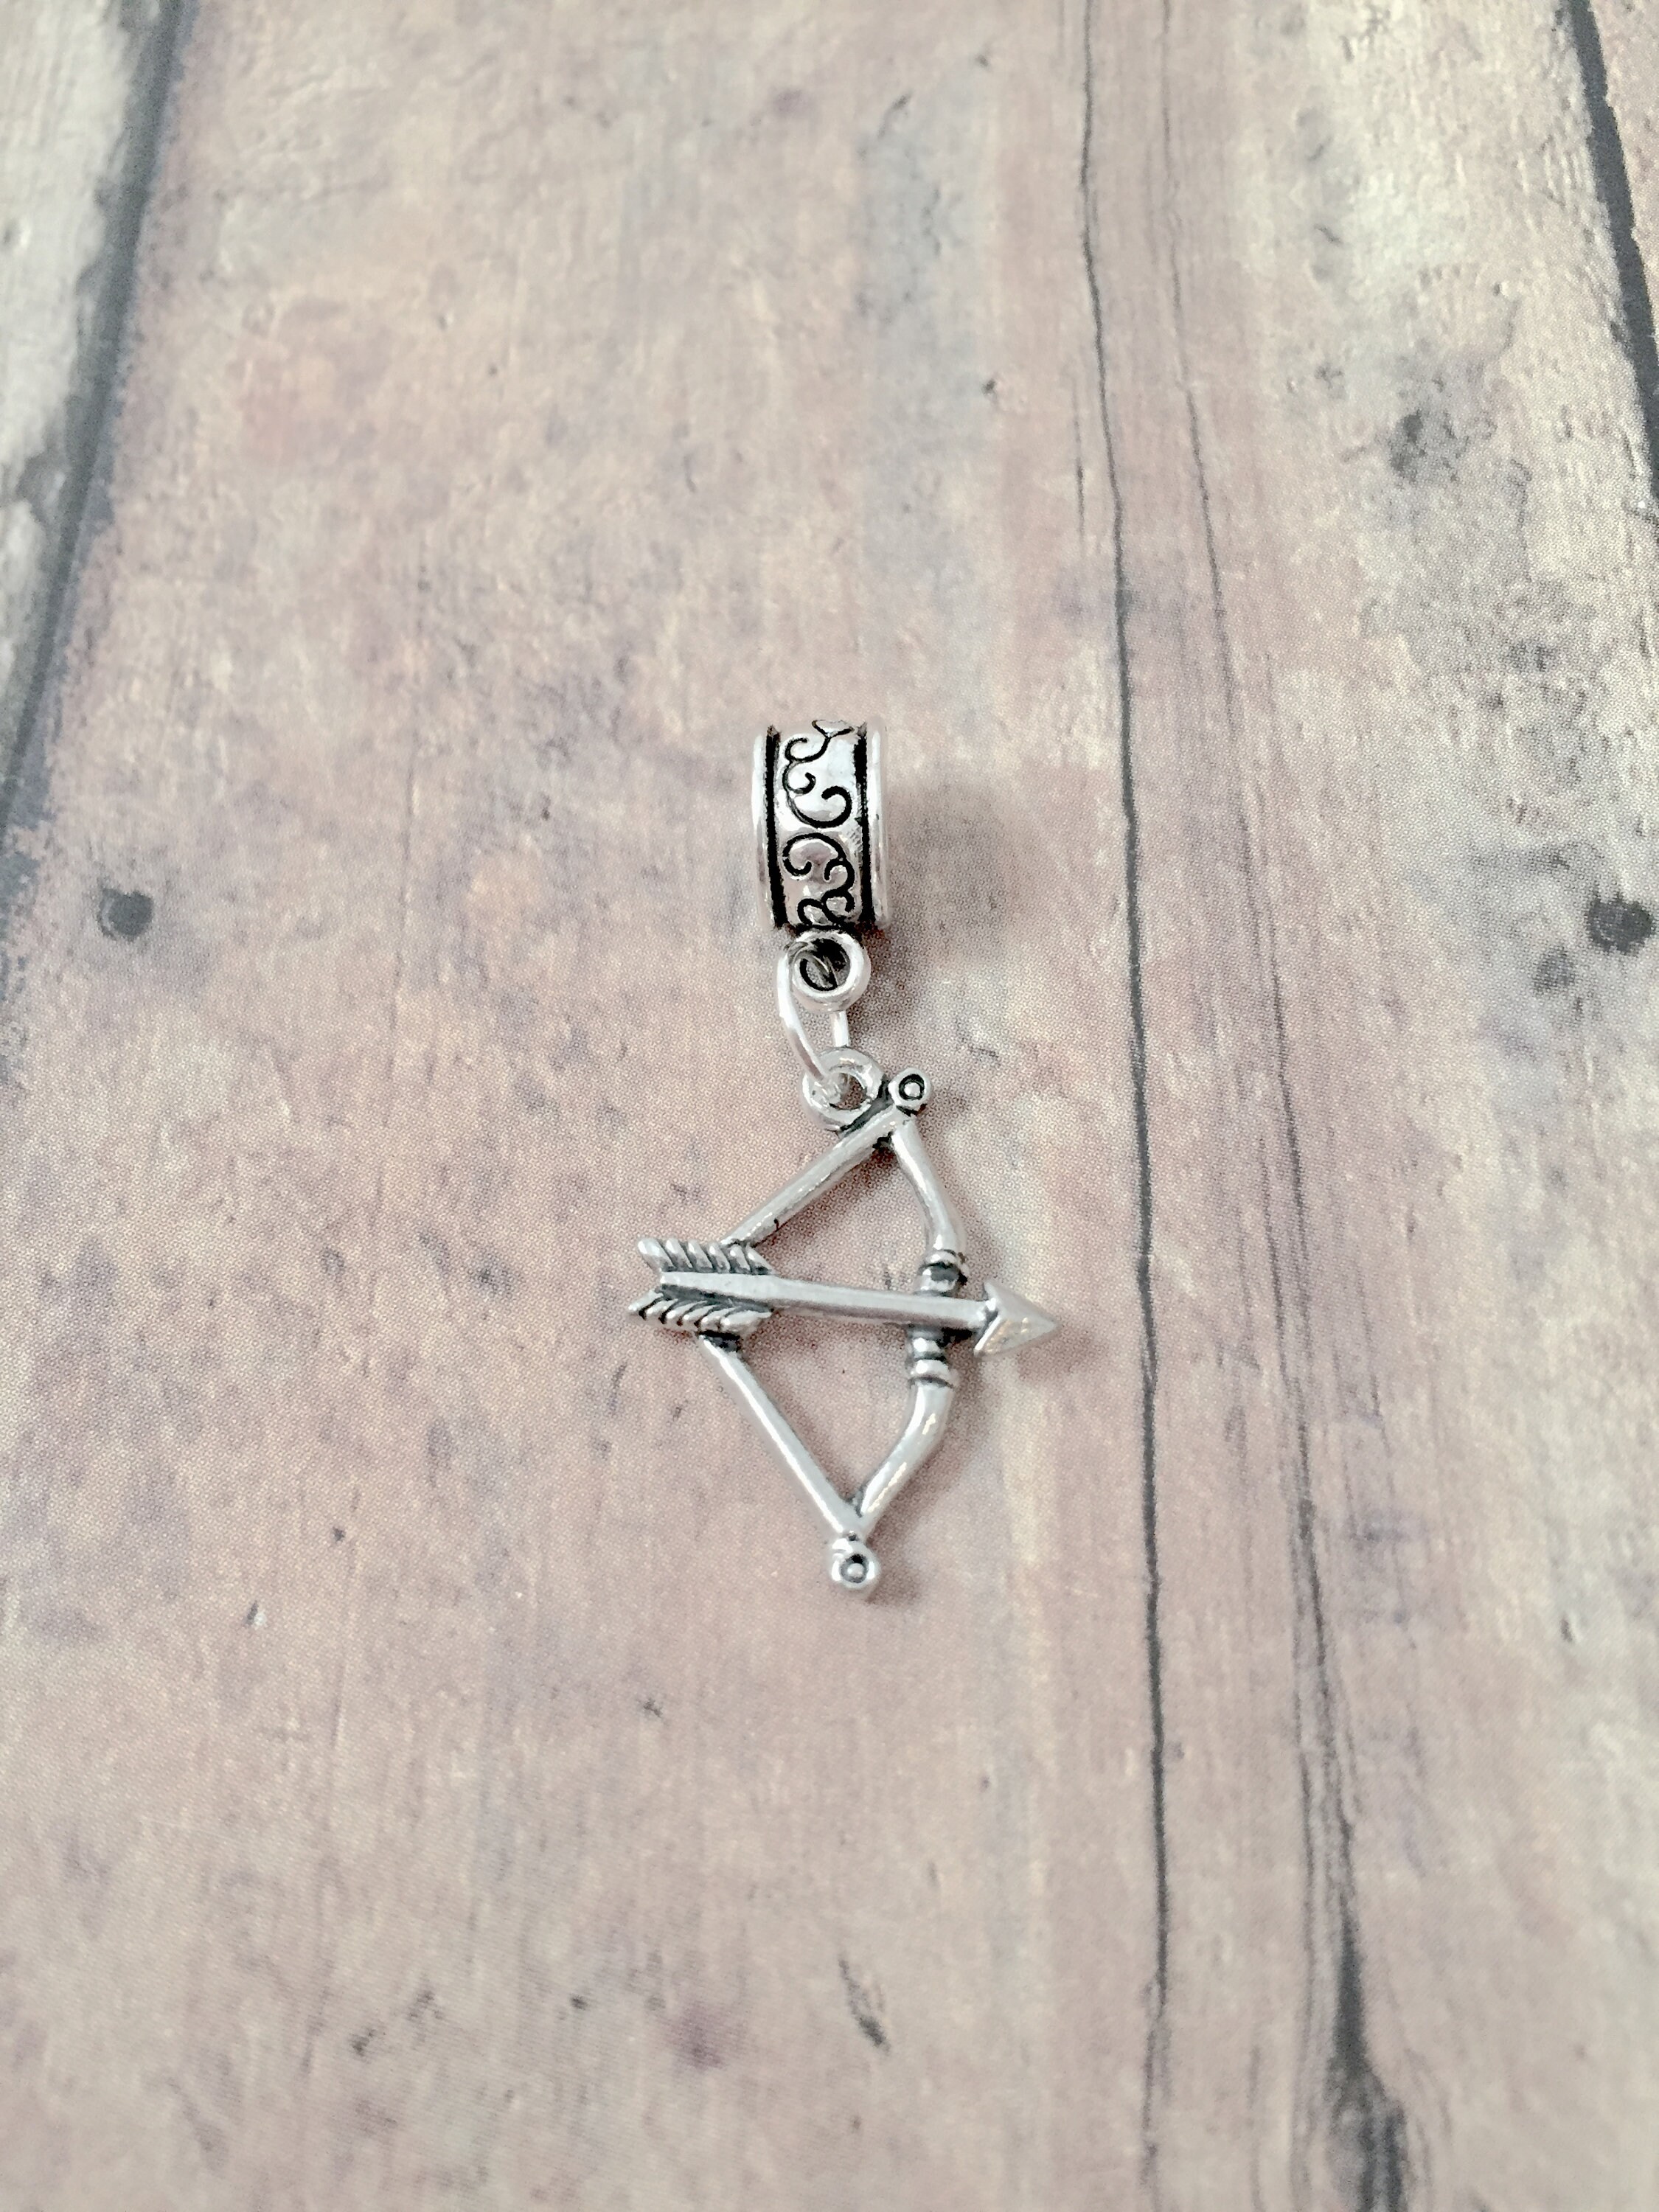 20 Bow and Arrow Charm Bows & Arrows Charms Large Pendants For